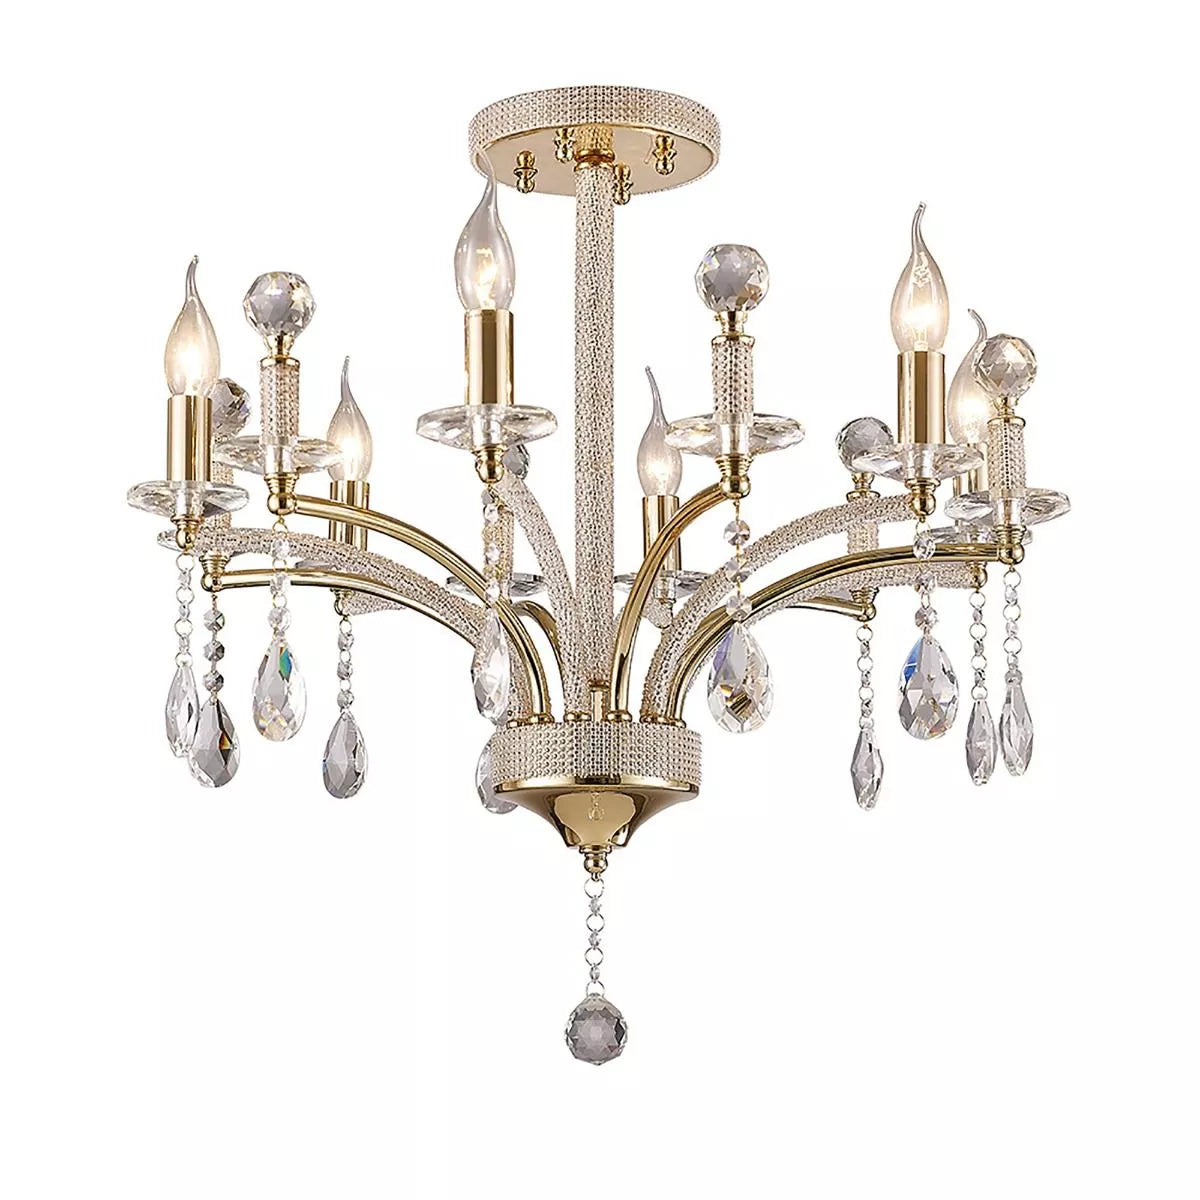 IL32366 Fiore Crystal 6 Light Semi Flush Ceiling Fitting in French Gold Frame by Diyas